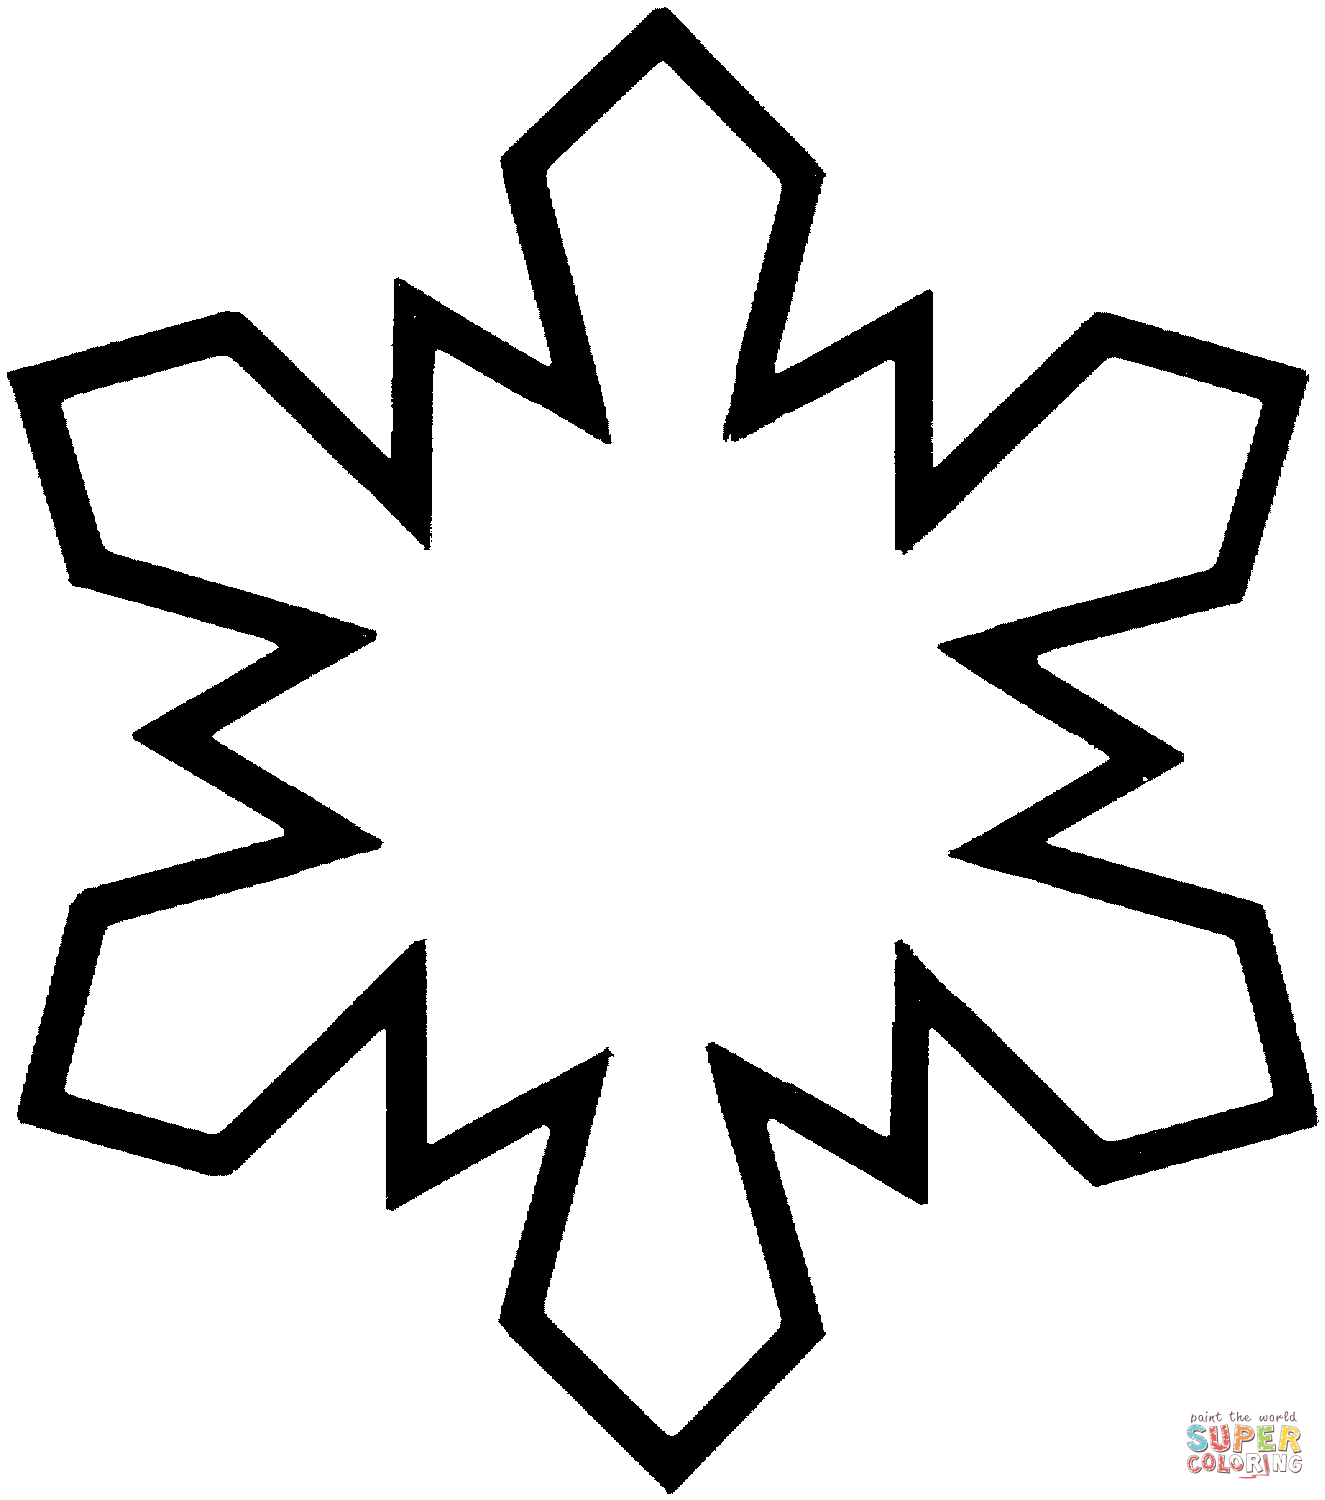 Snowflake To Print - Coloring Pages for Kids and for Adults